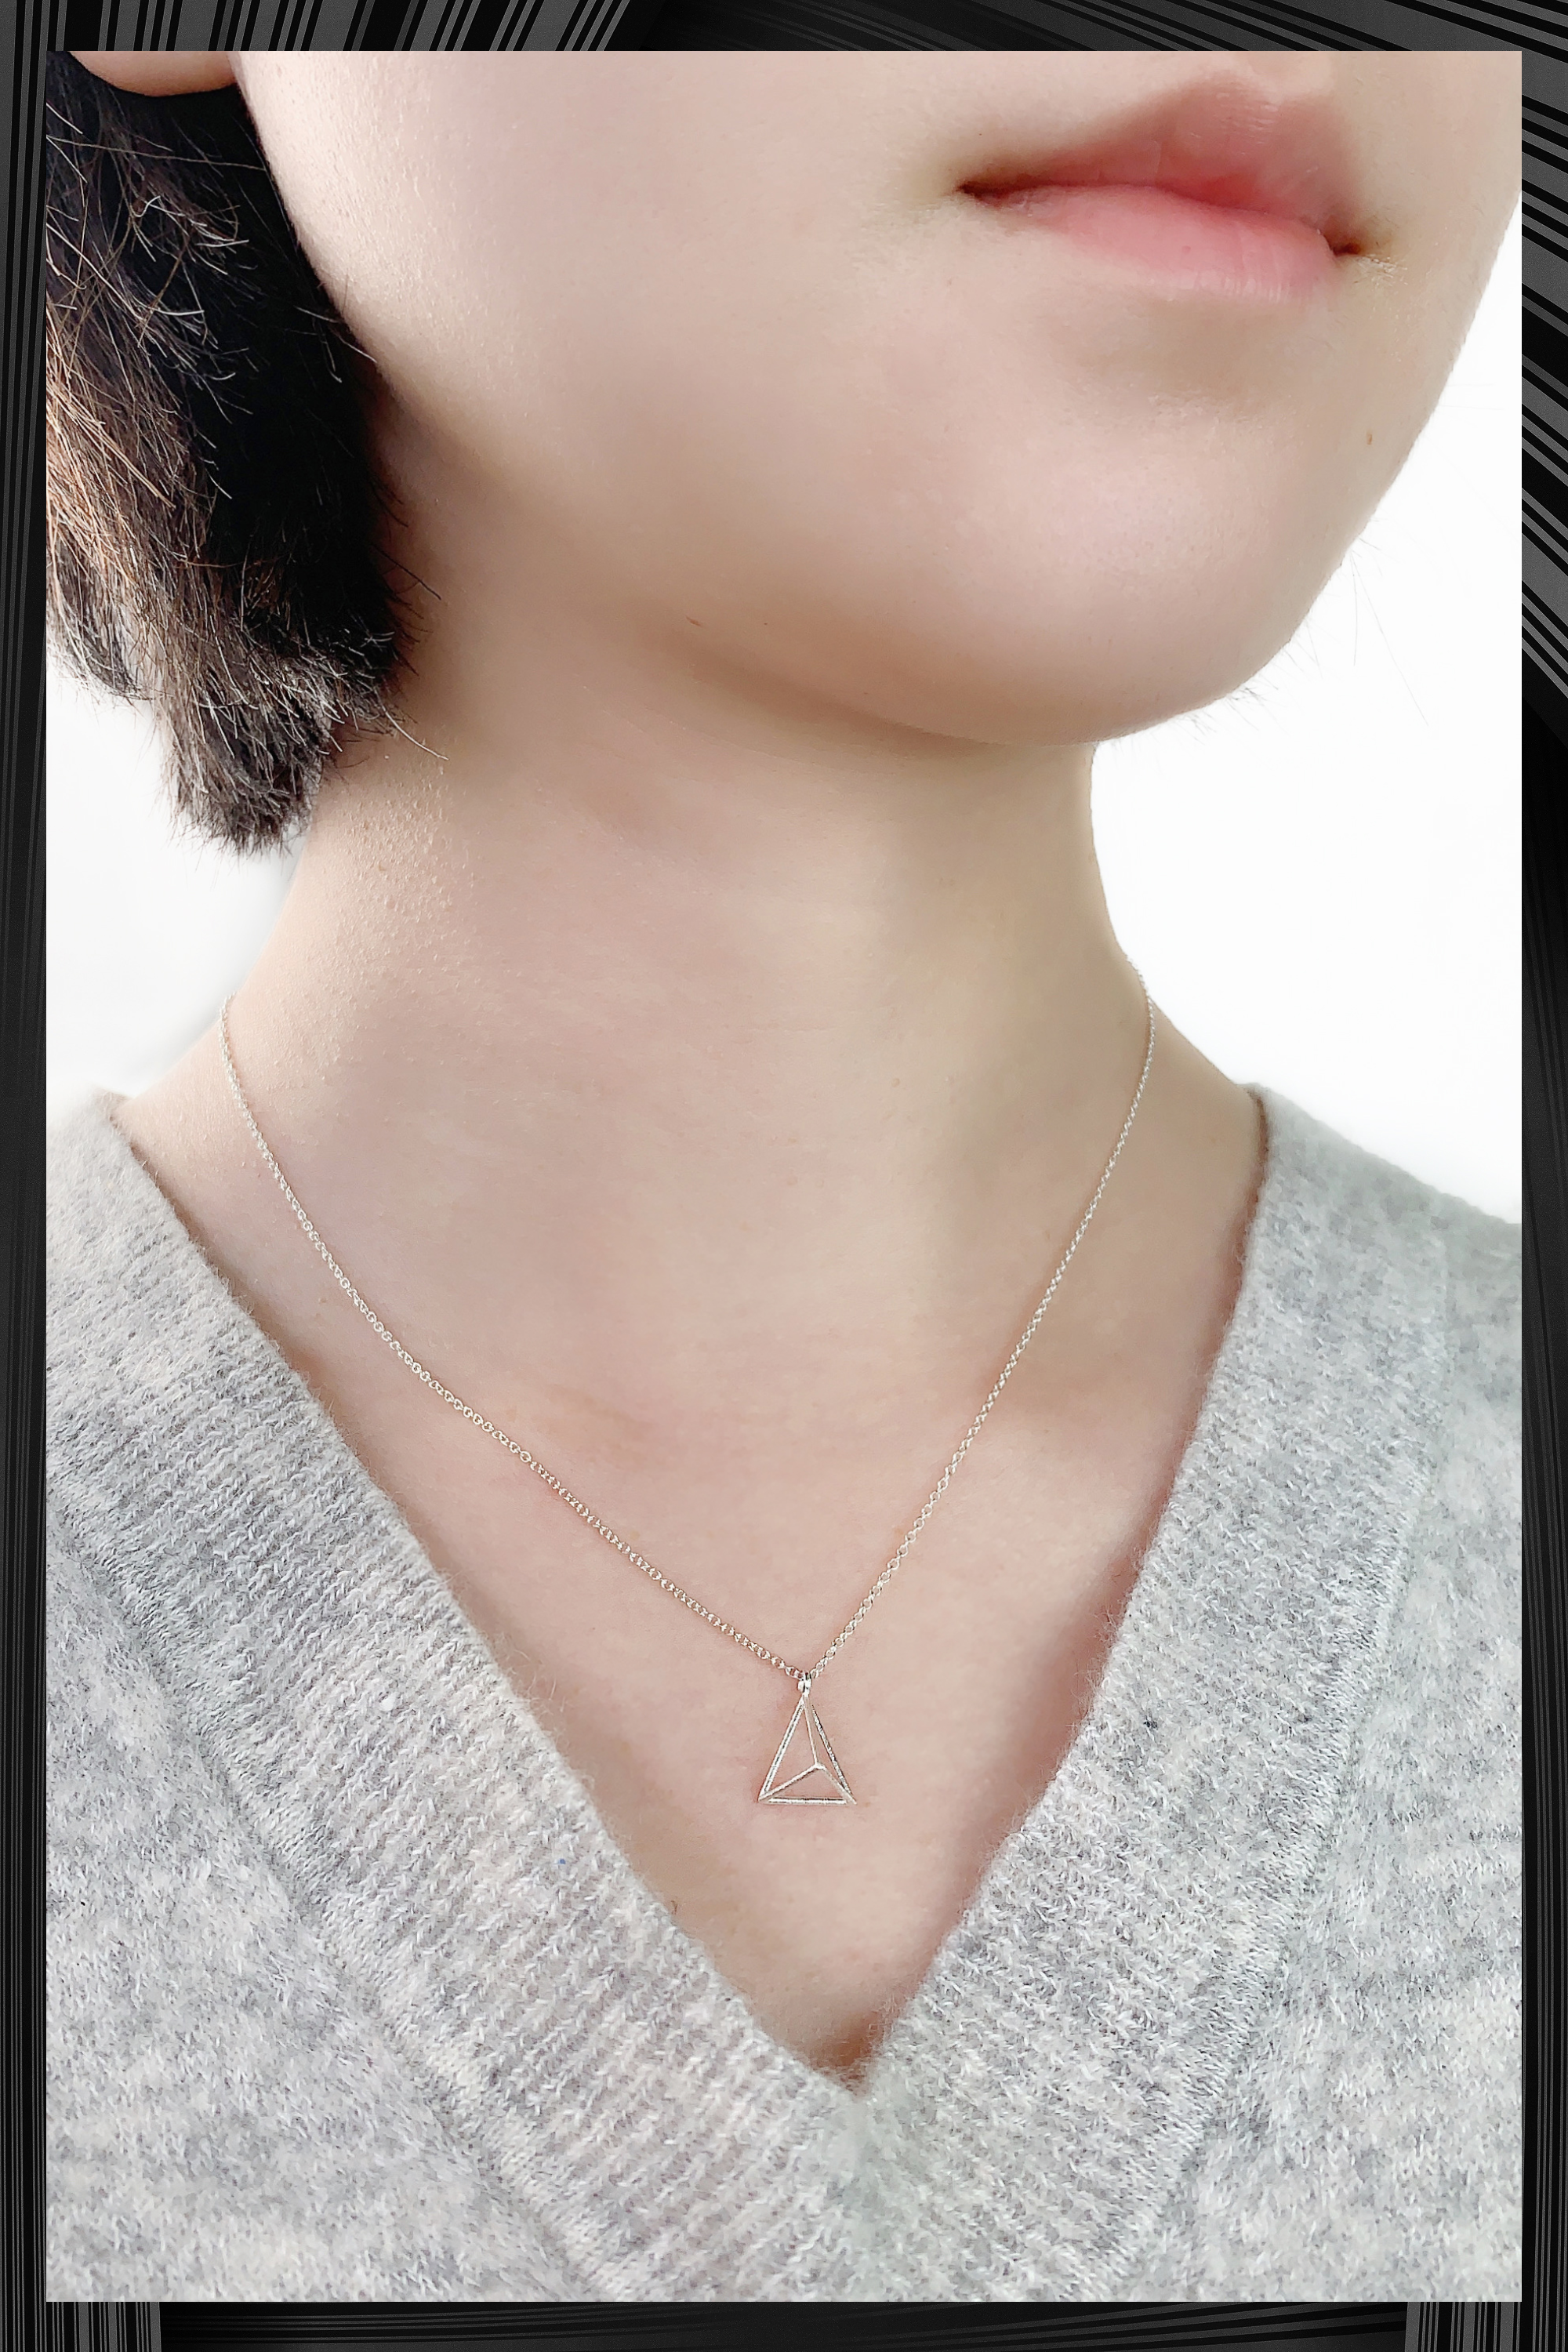 Golden Spiral with Golden Triangle Necklace - Delftia science jewelry